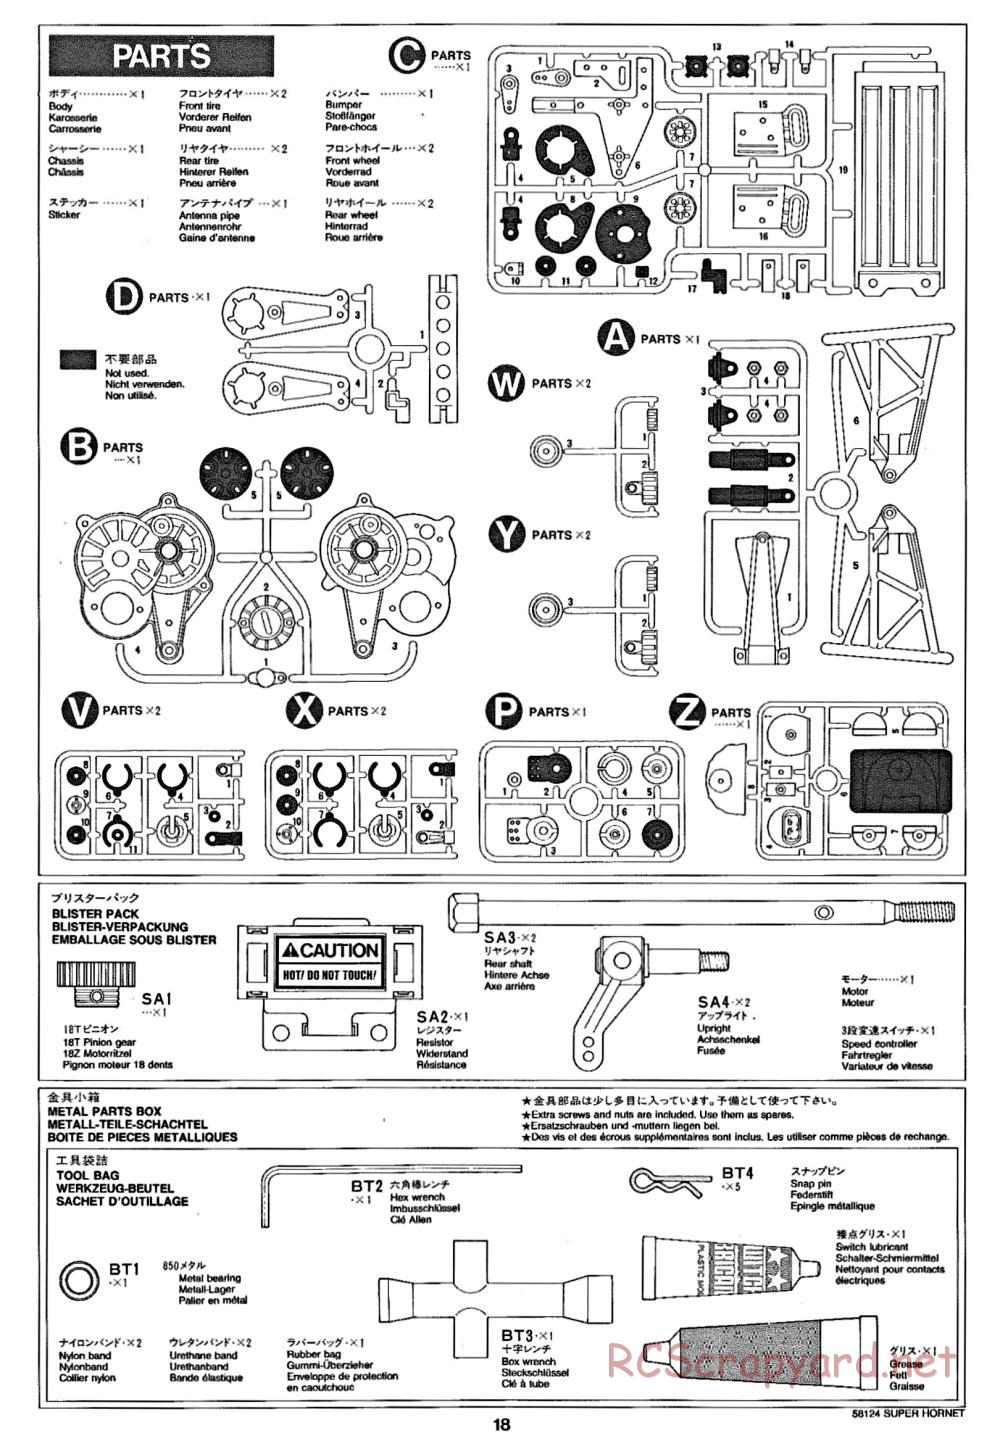 Tamiya - Super Hornet Chassis - Manual - Page 18